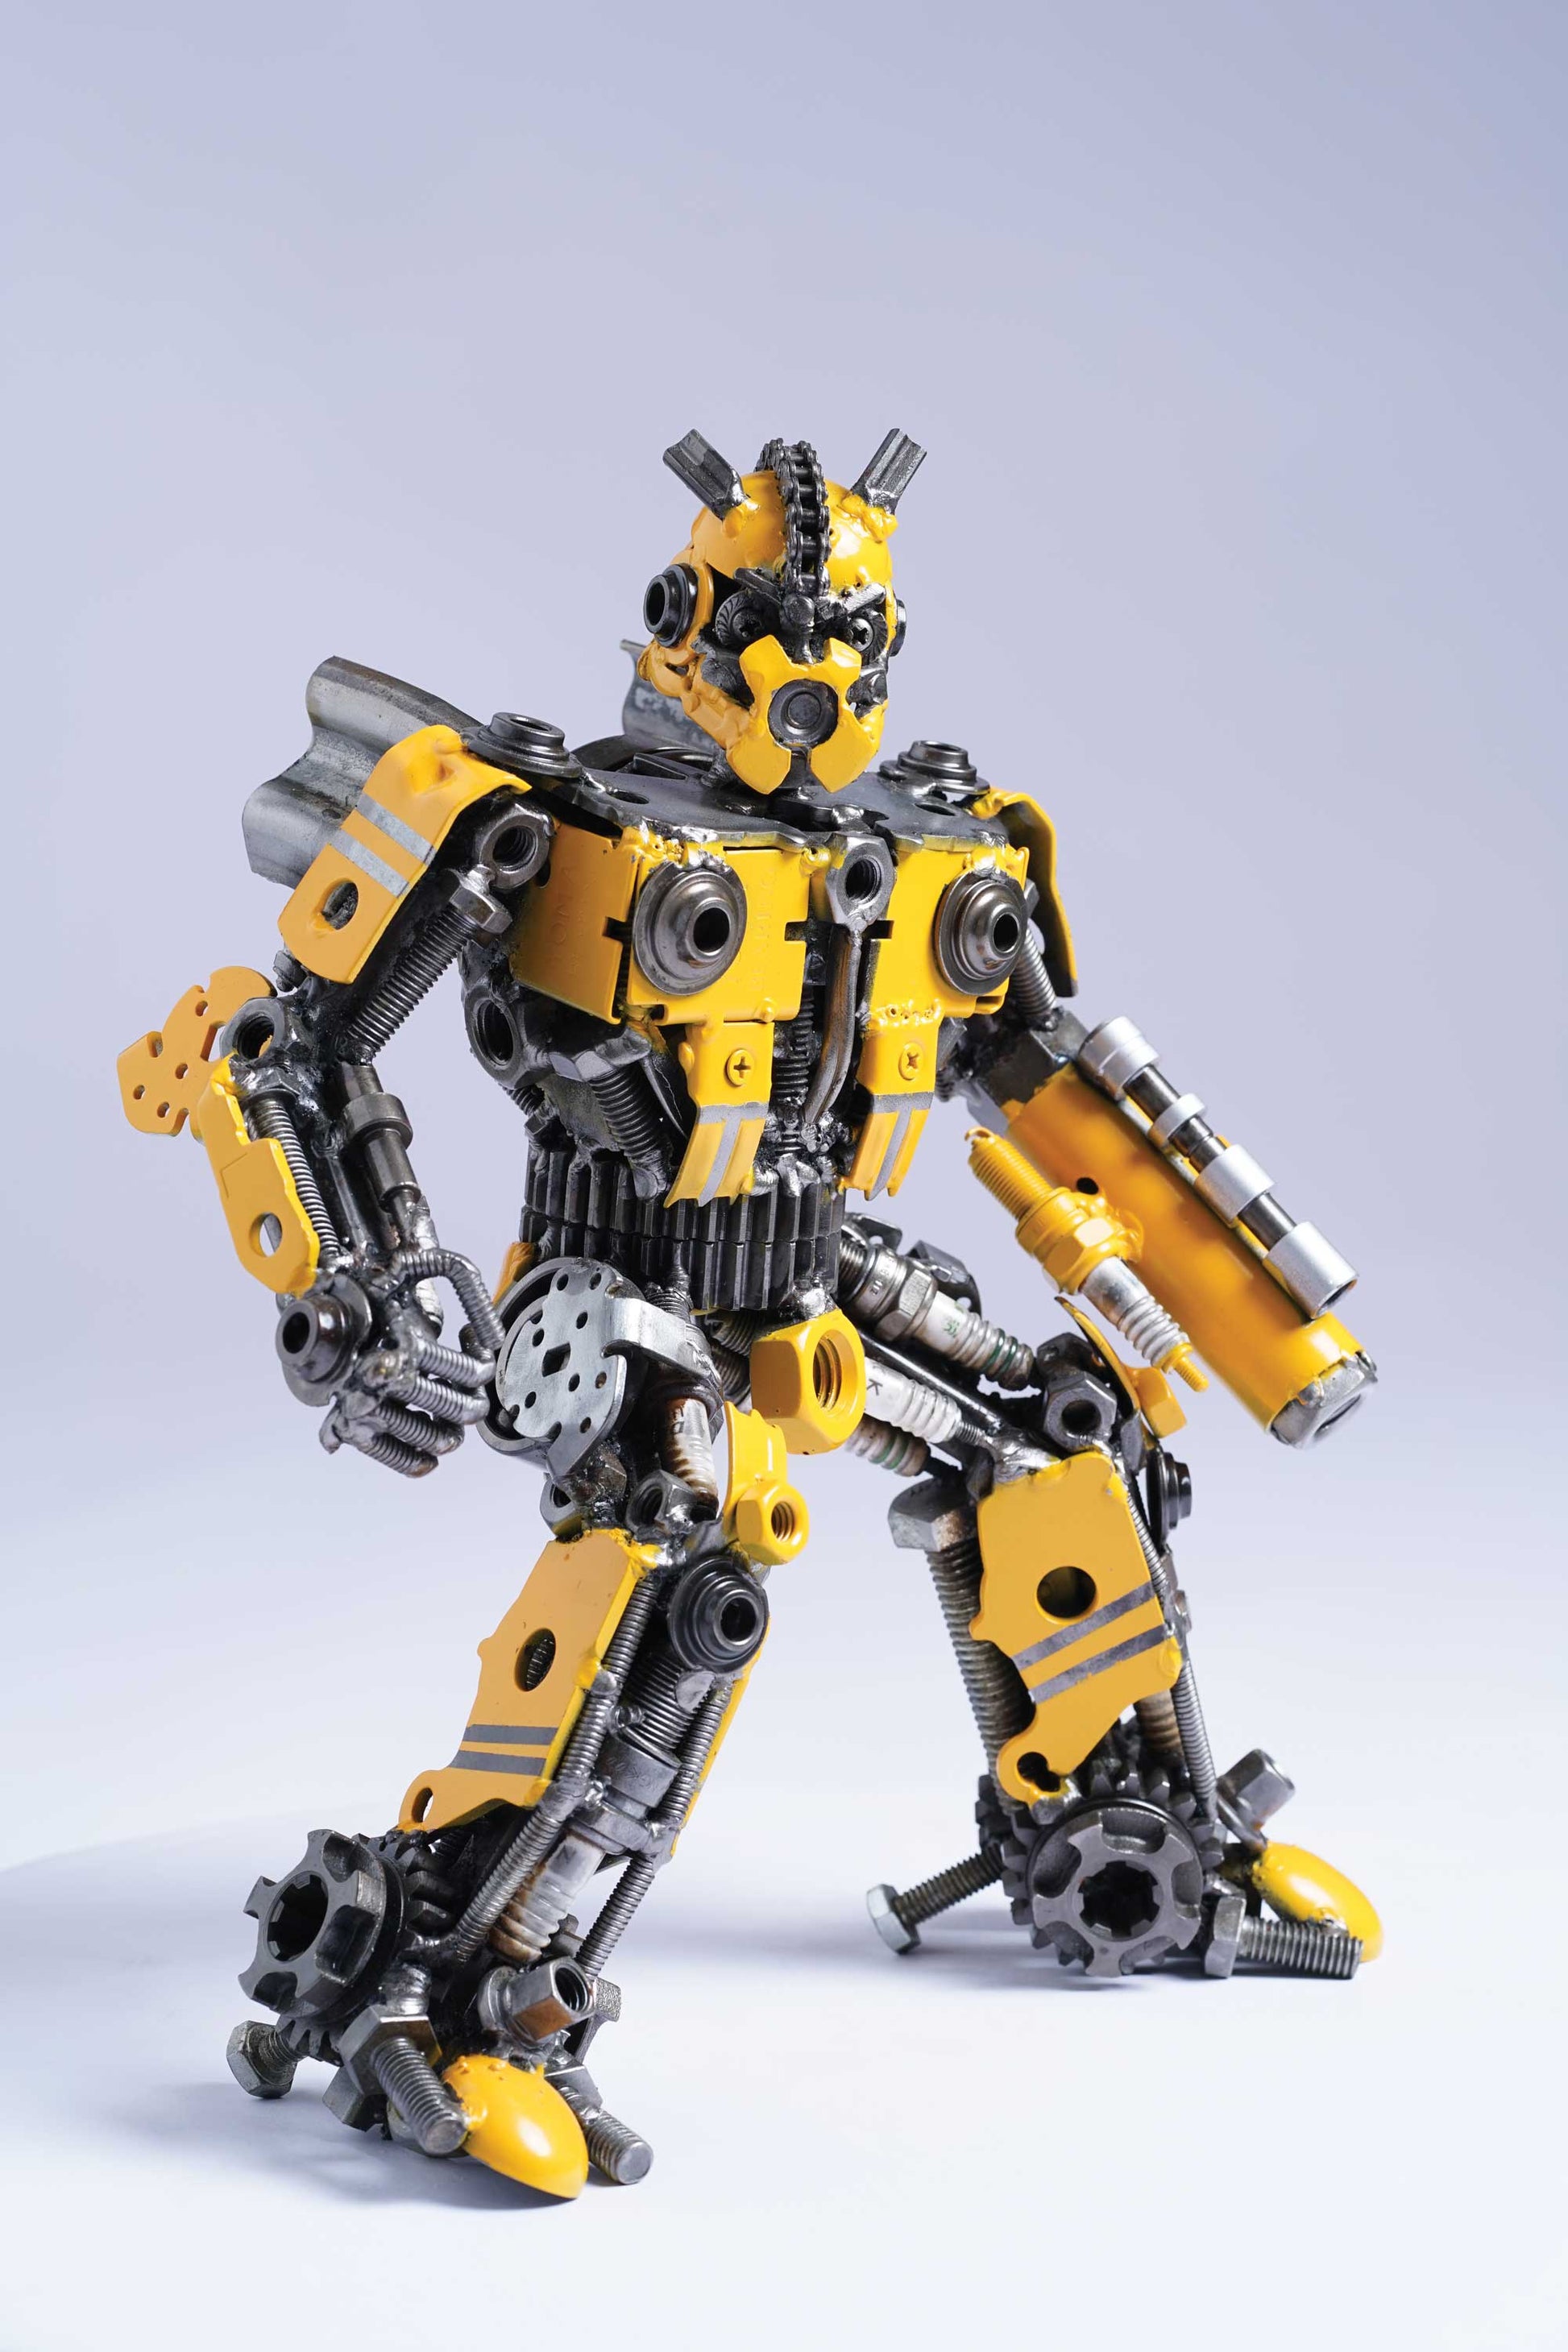 Transformers Bumblebee metal action figure hand-crafted from junk auto parts with attention to detail